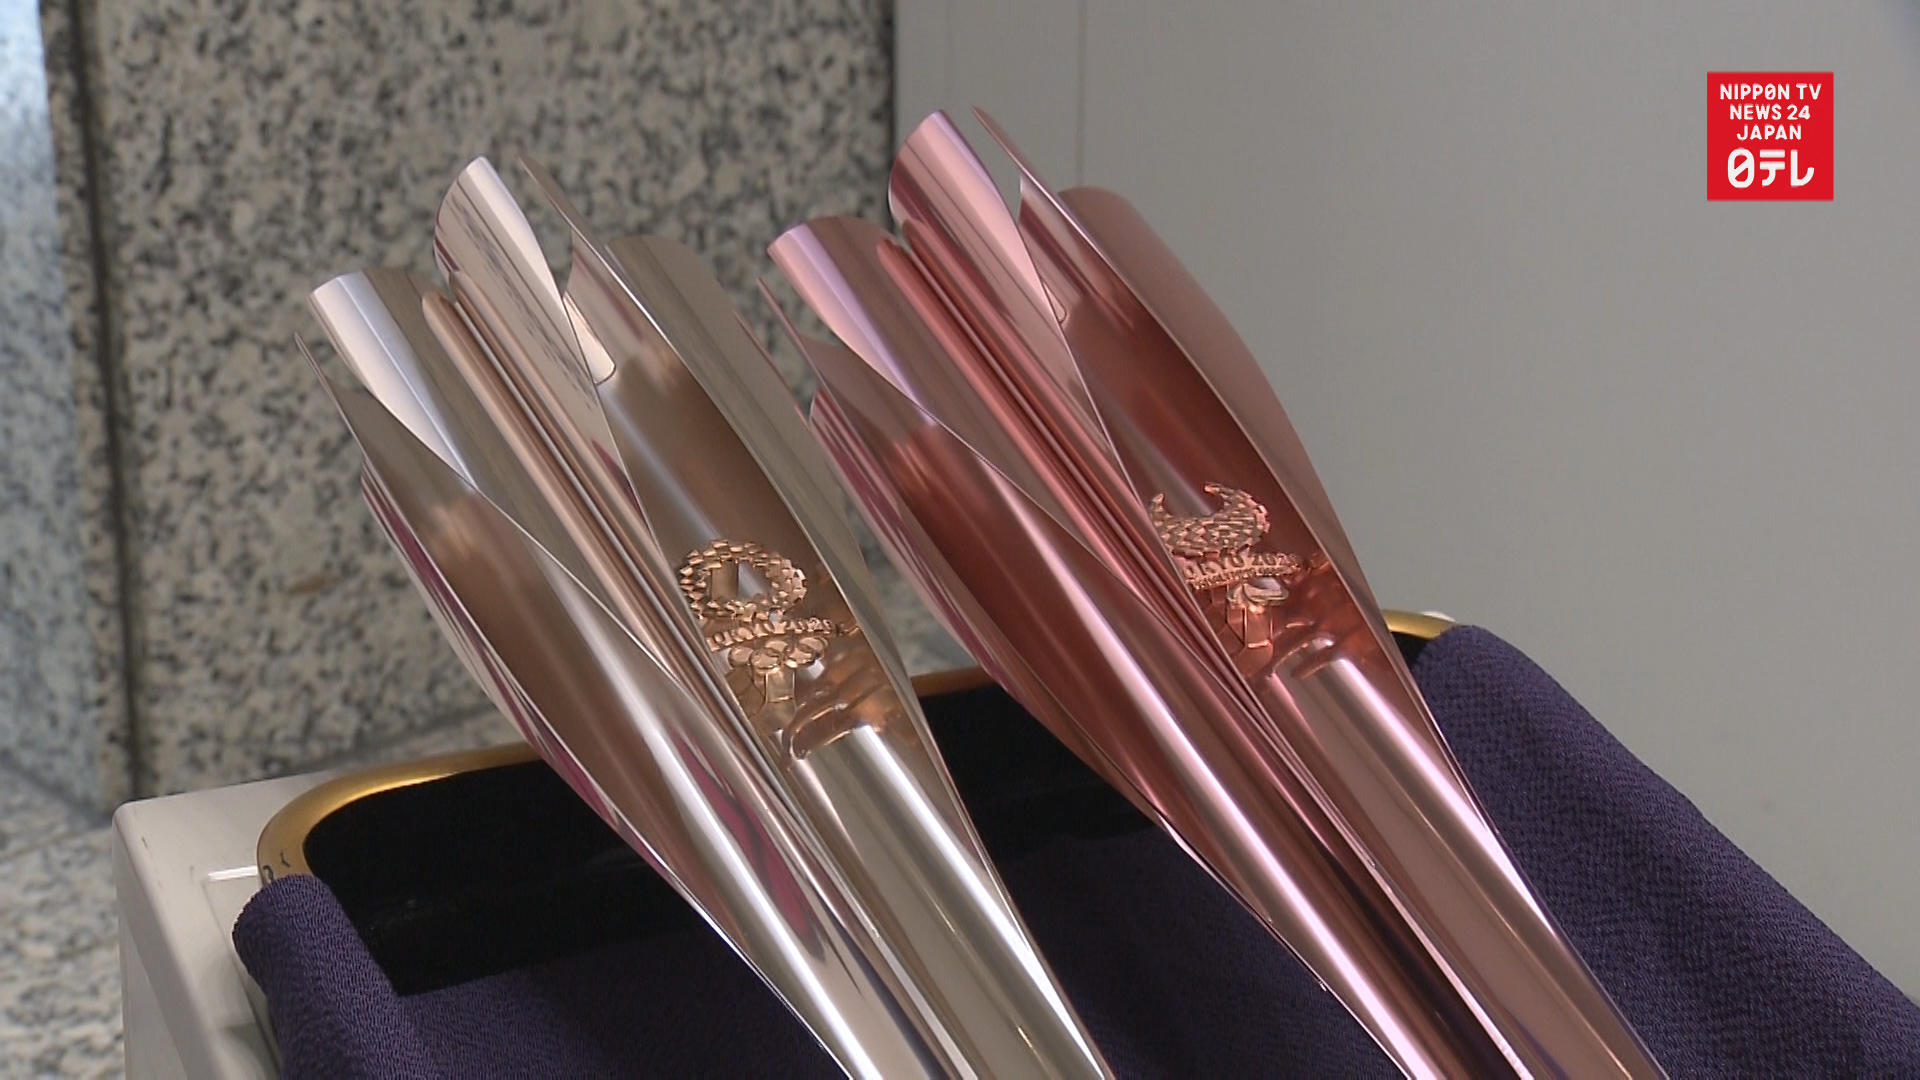 2020 Olympic torches on display in Tokyo